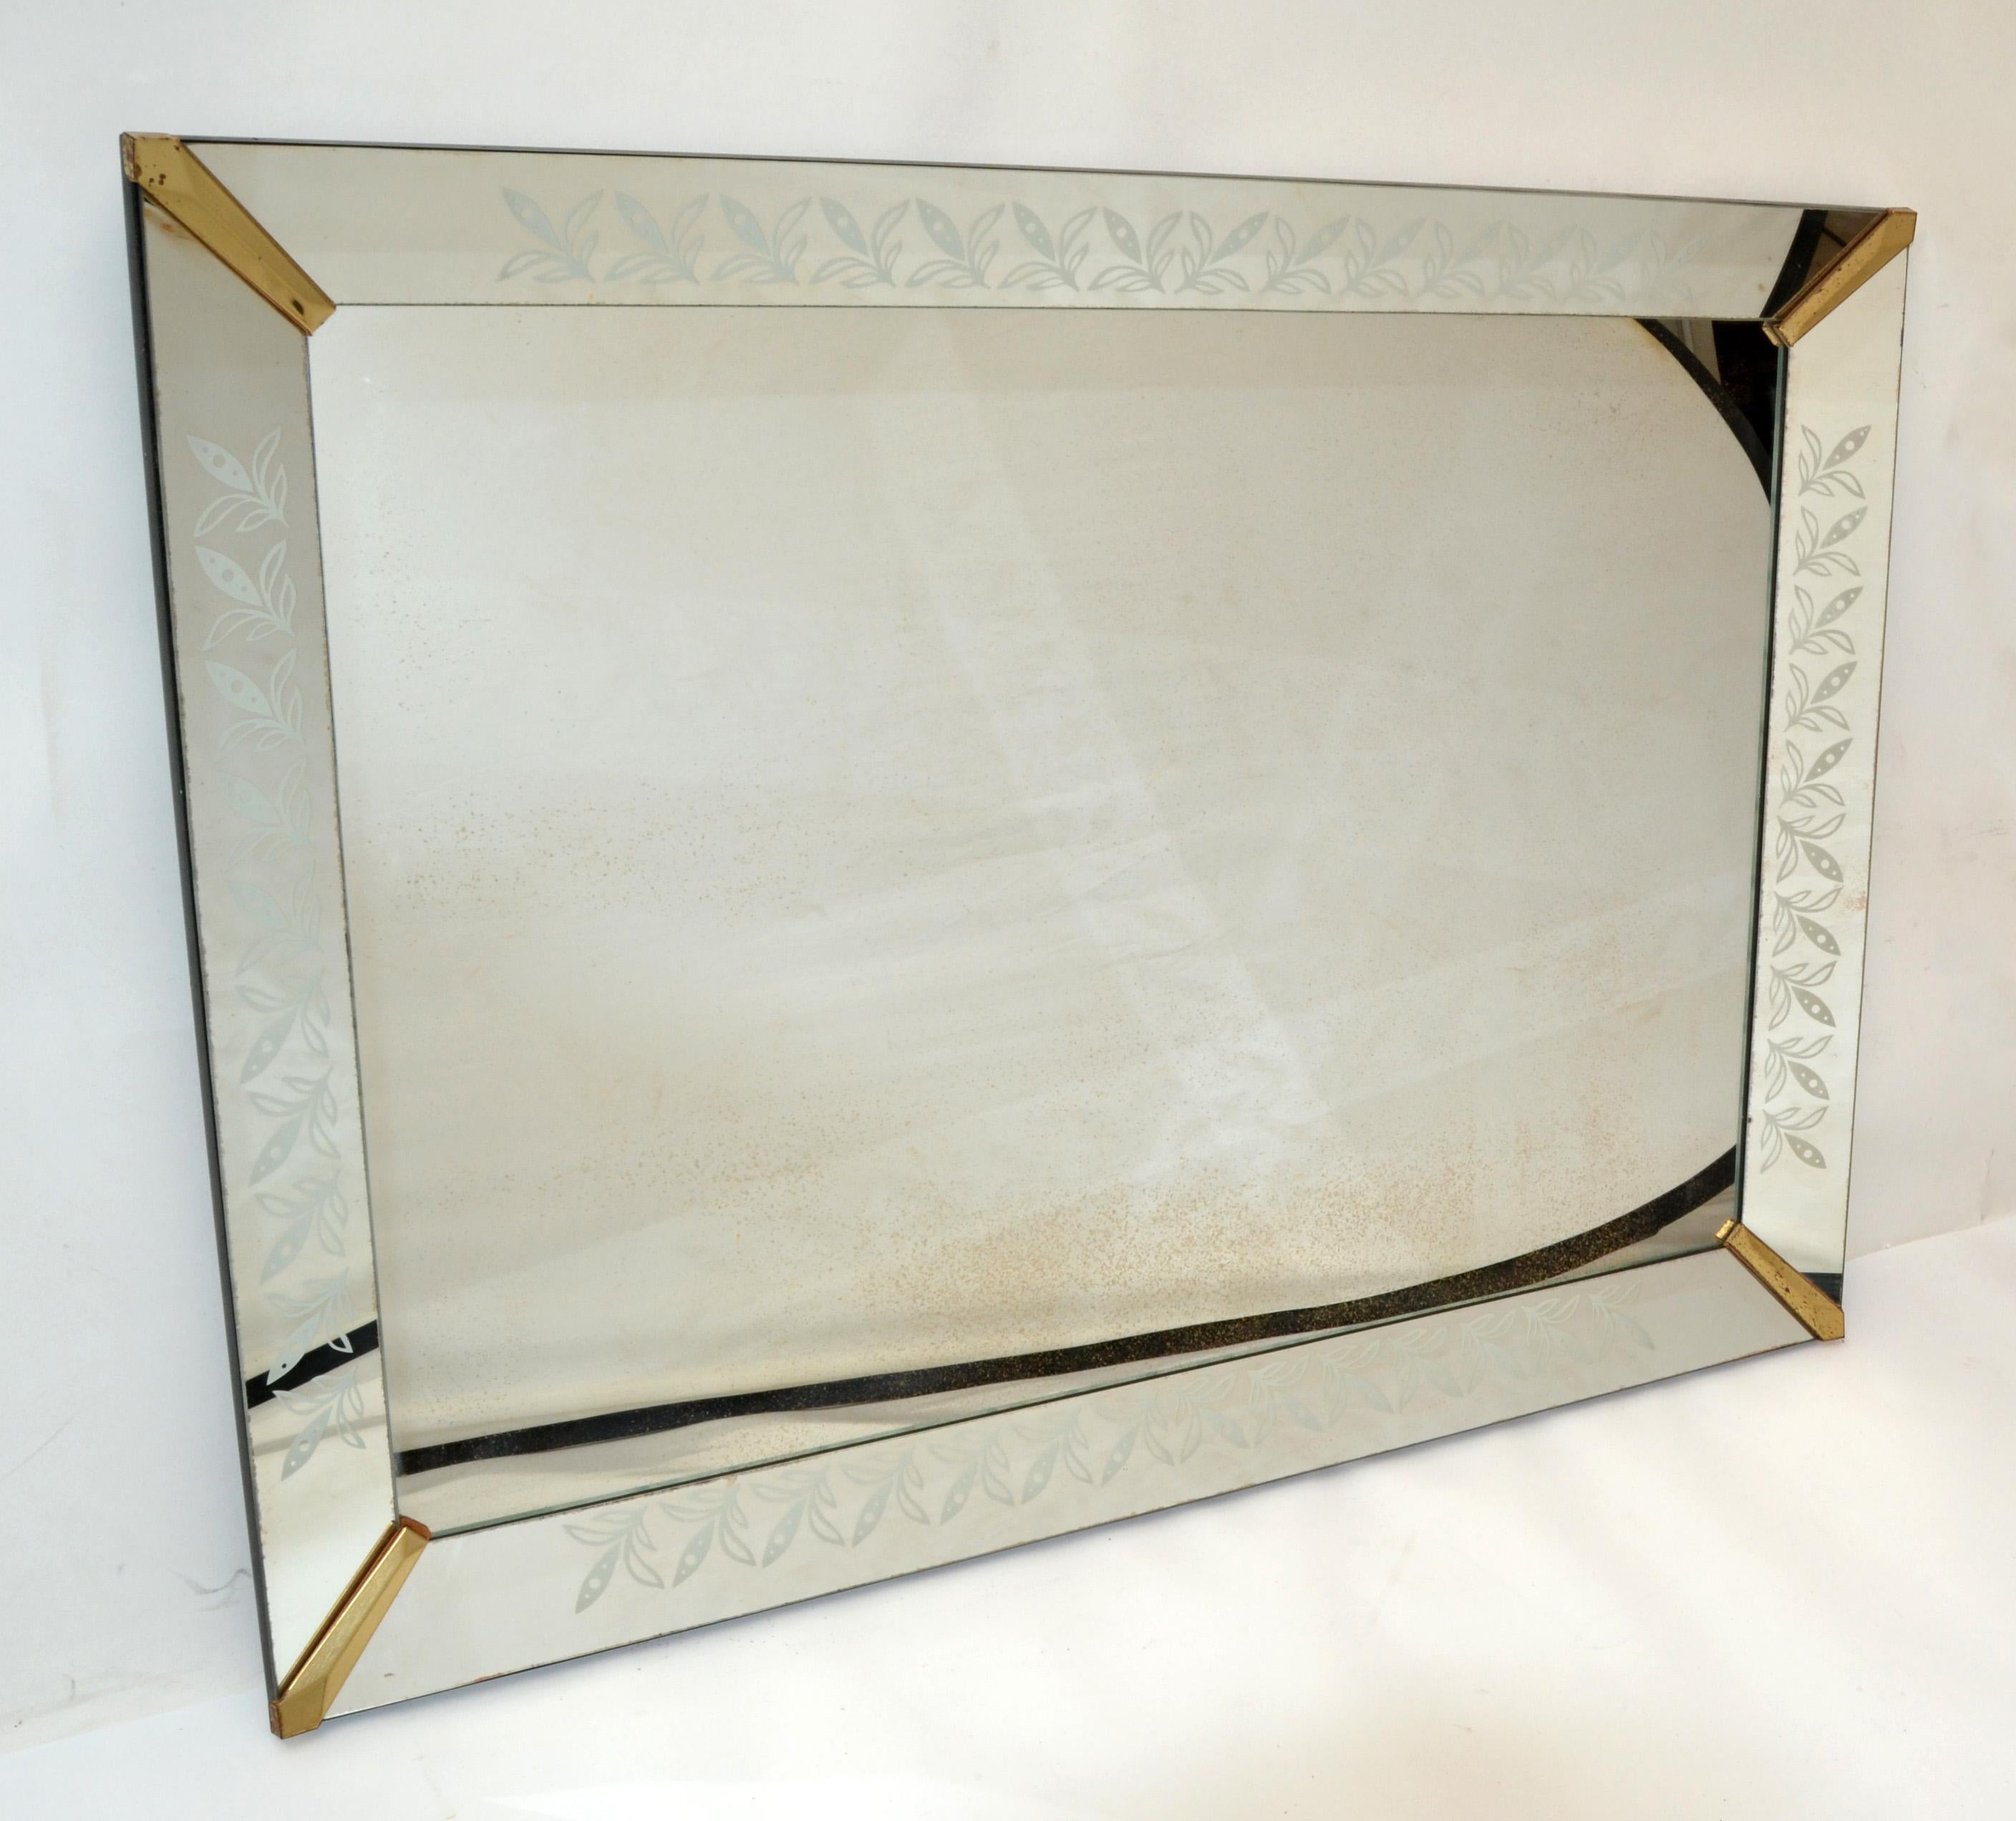 1940s Art Deco Venetian Style Etched Wall Mirror with Brass Finished Corners In Good Condition For Sale In Miami, FL